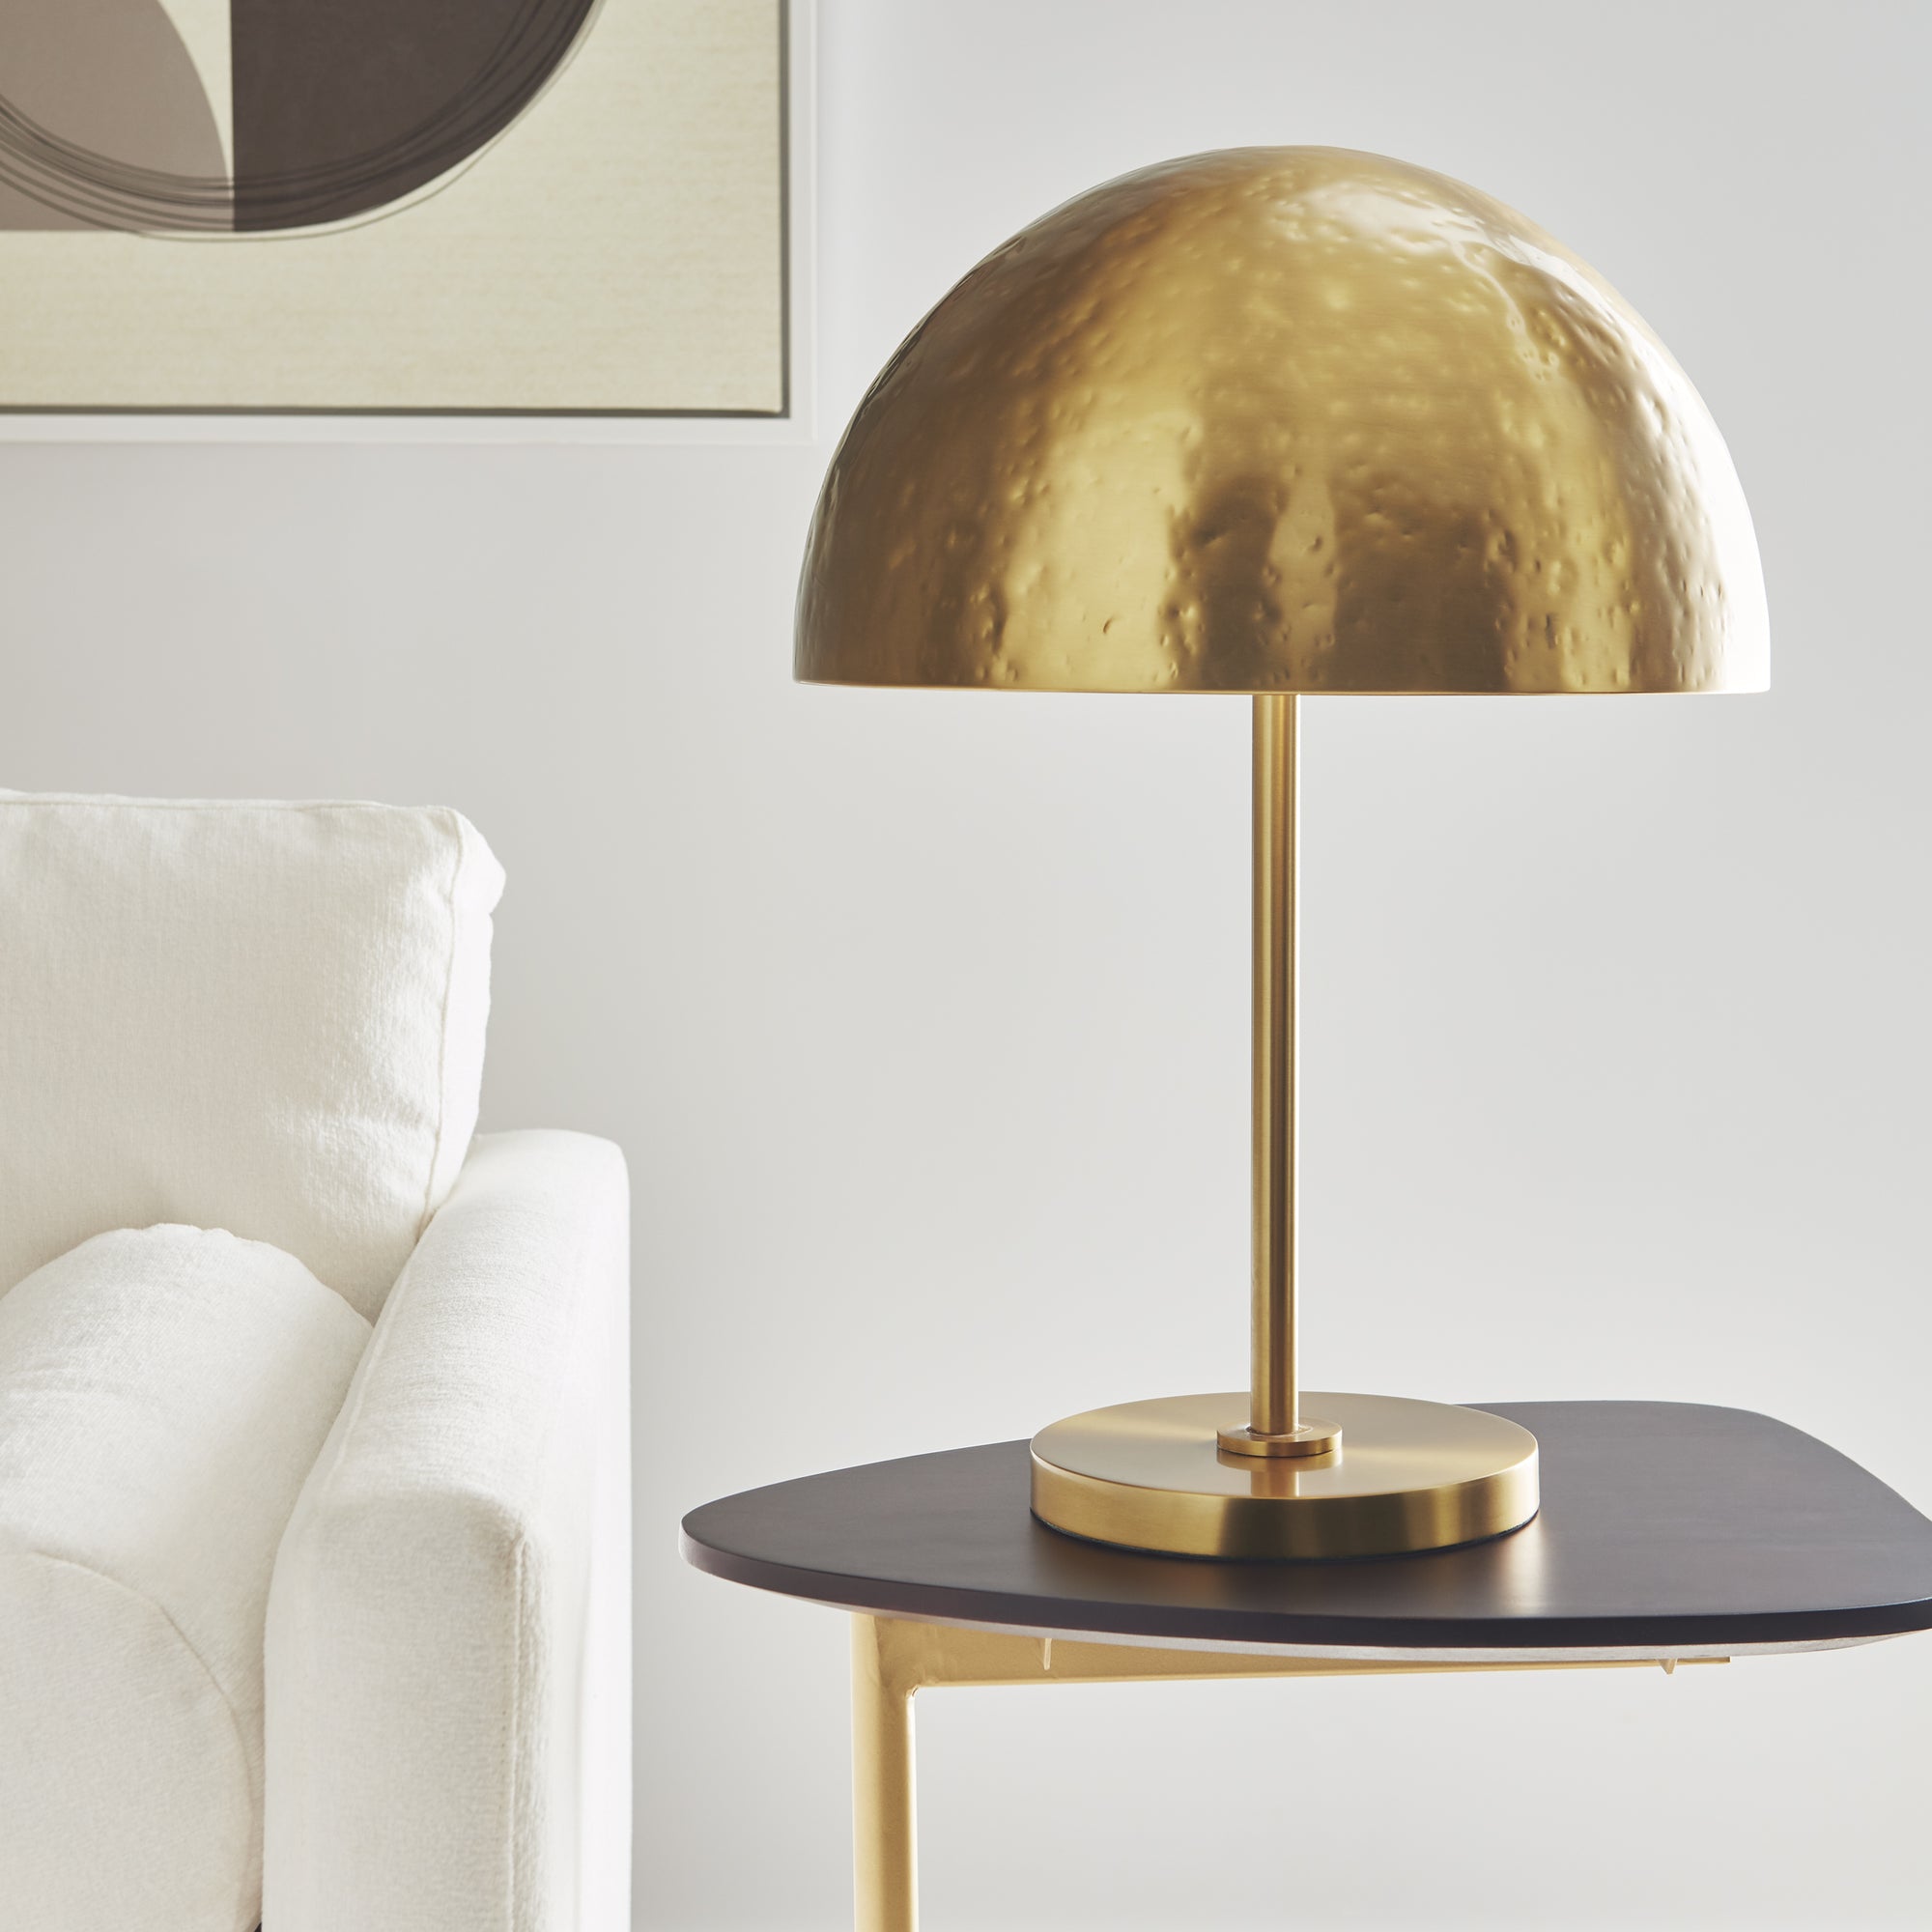 WHARE 1L table lamp, Burnished Brass finish - ET1292BBS1